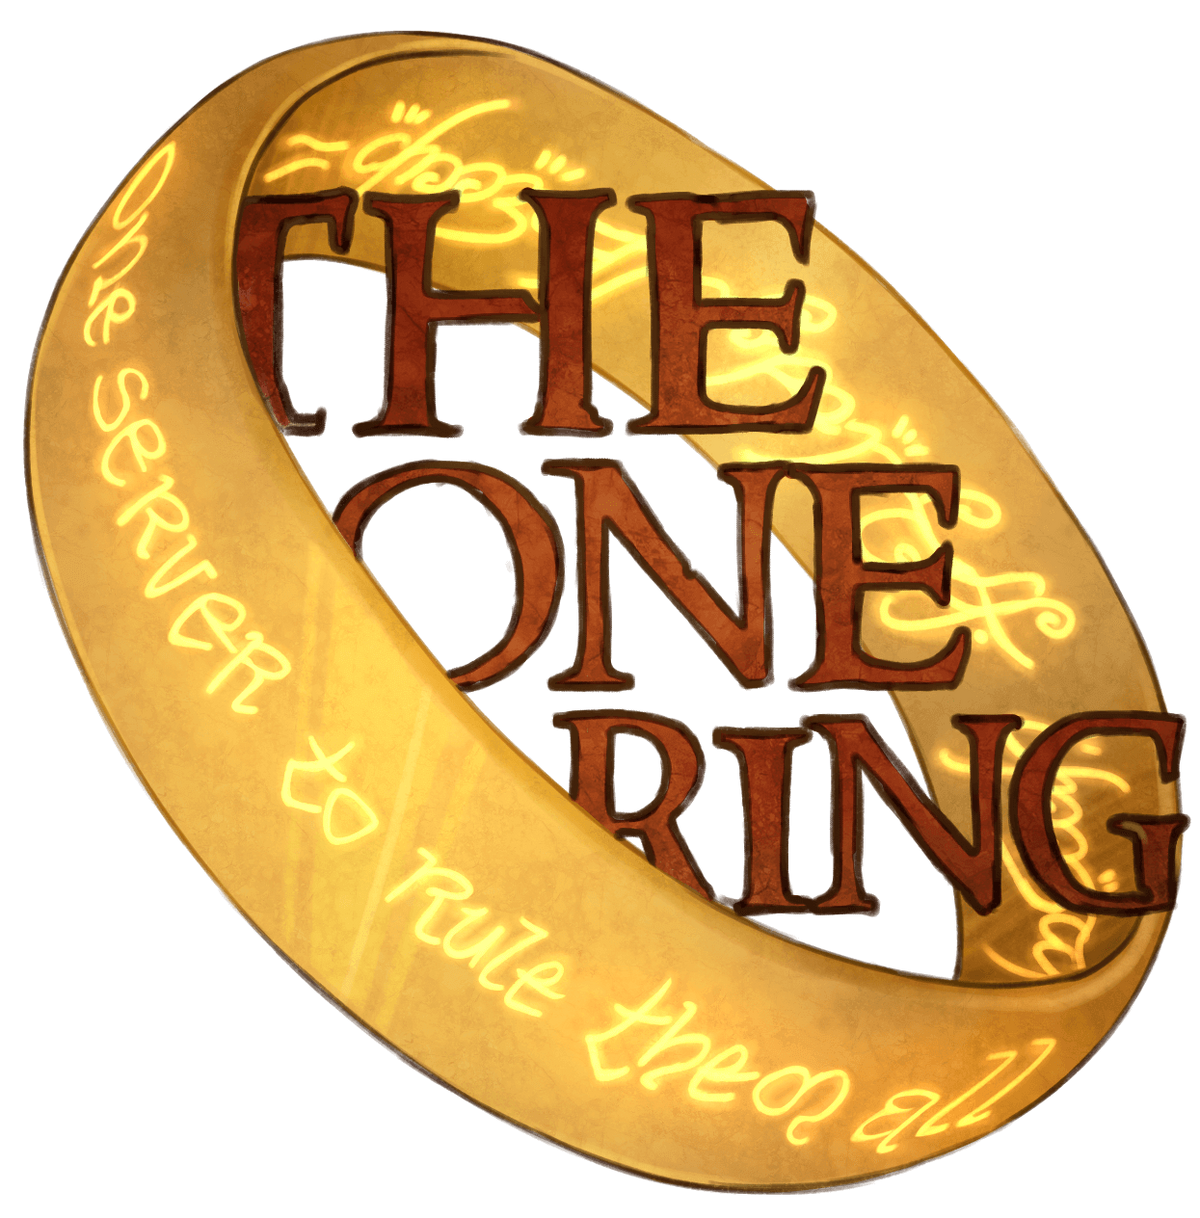 Servers/LOTR: A Story in Middle-earth, The Lord of the Rings Minecraft Mod  Wiki